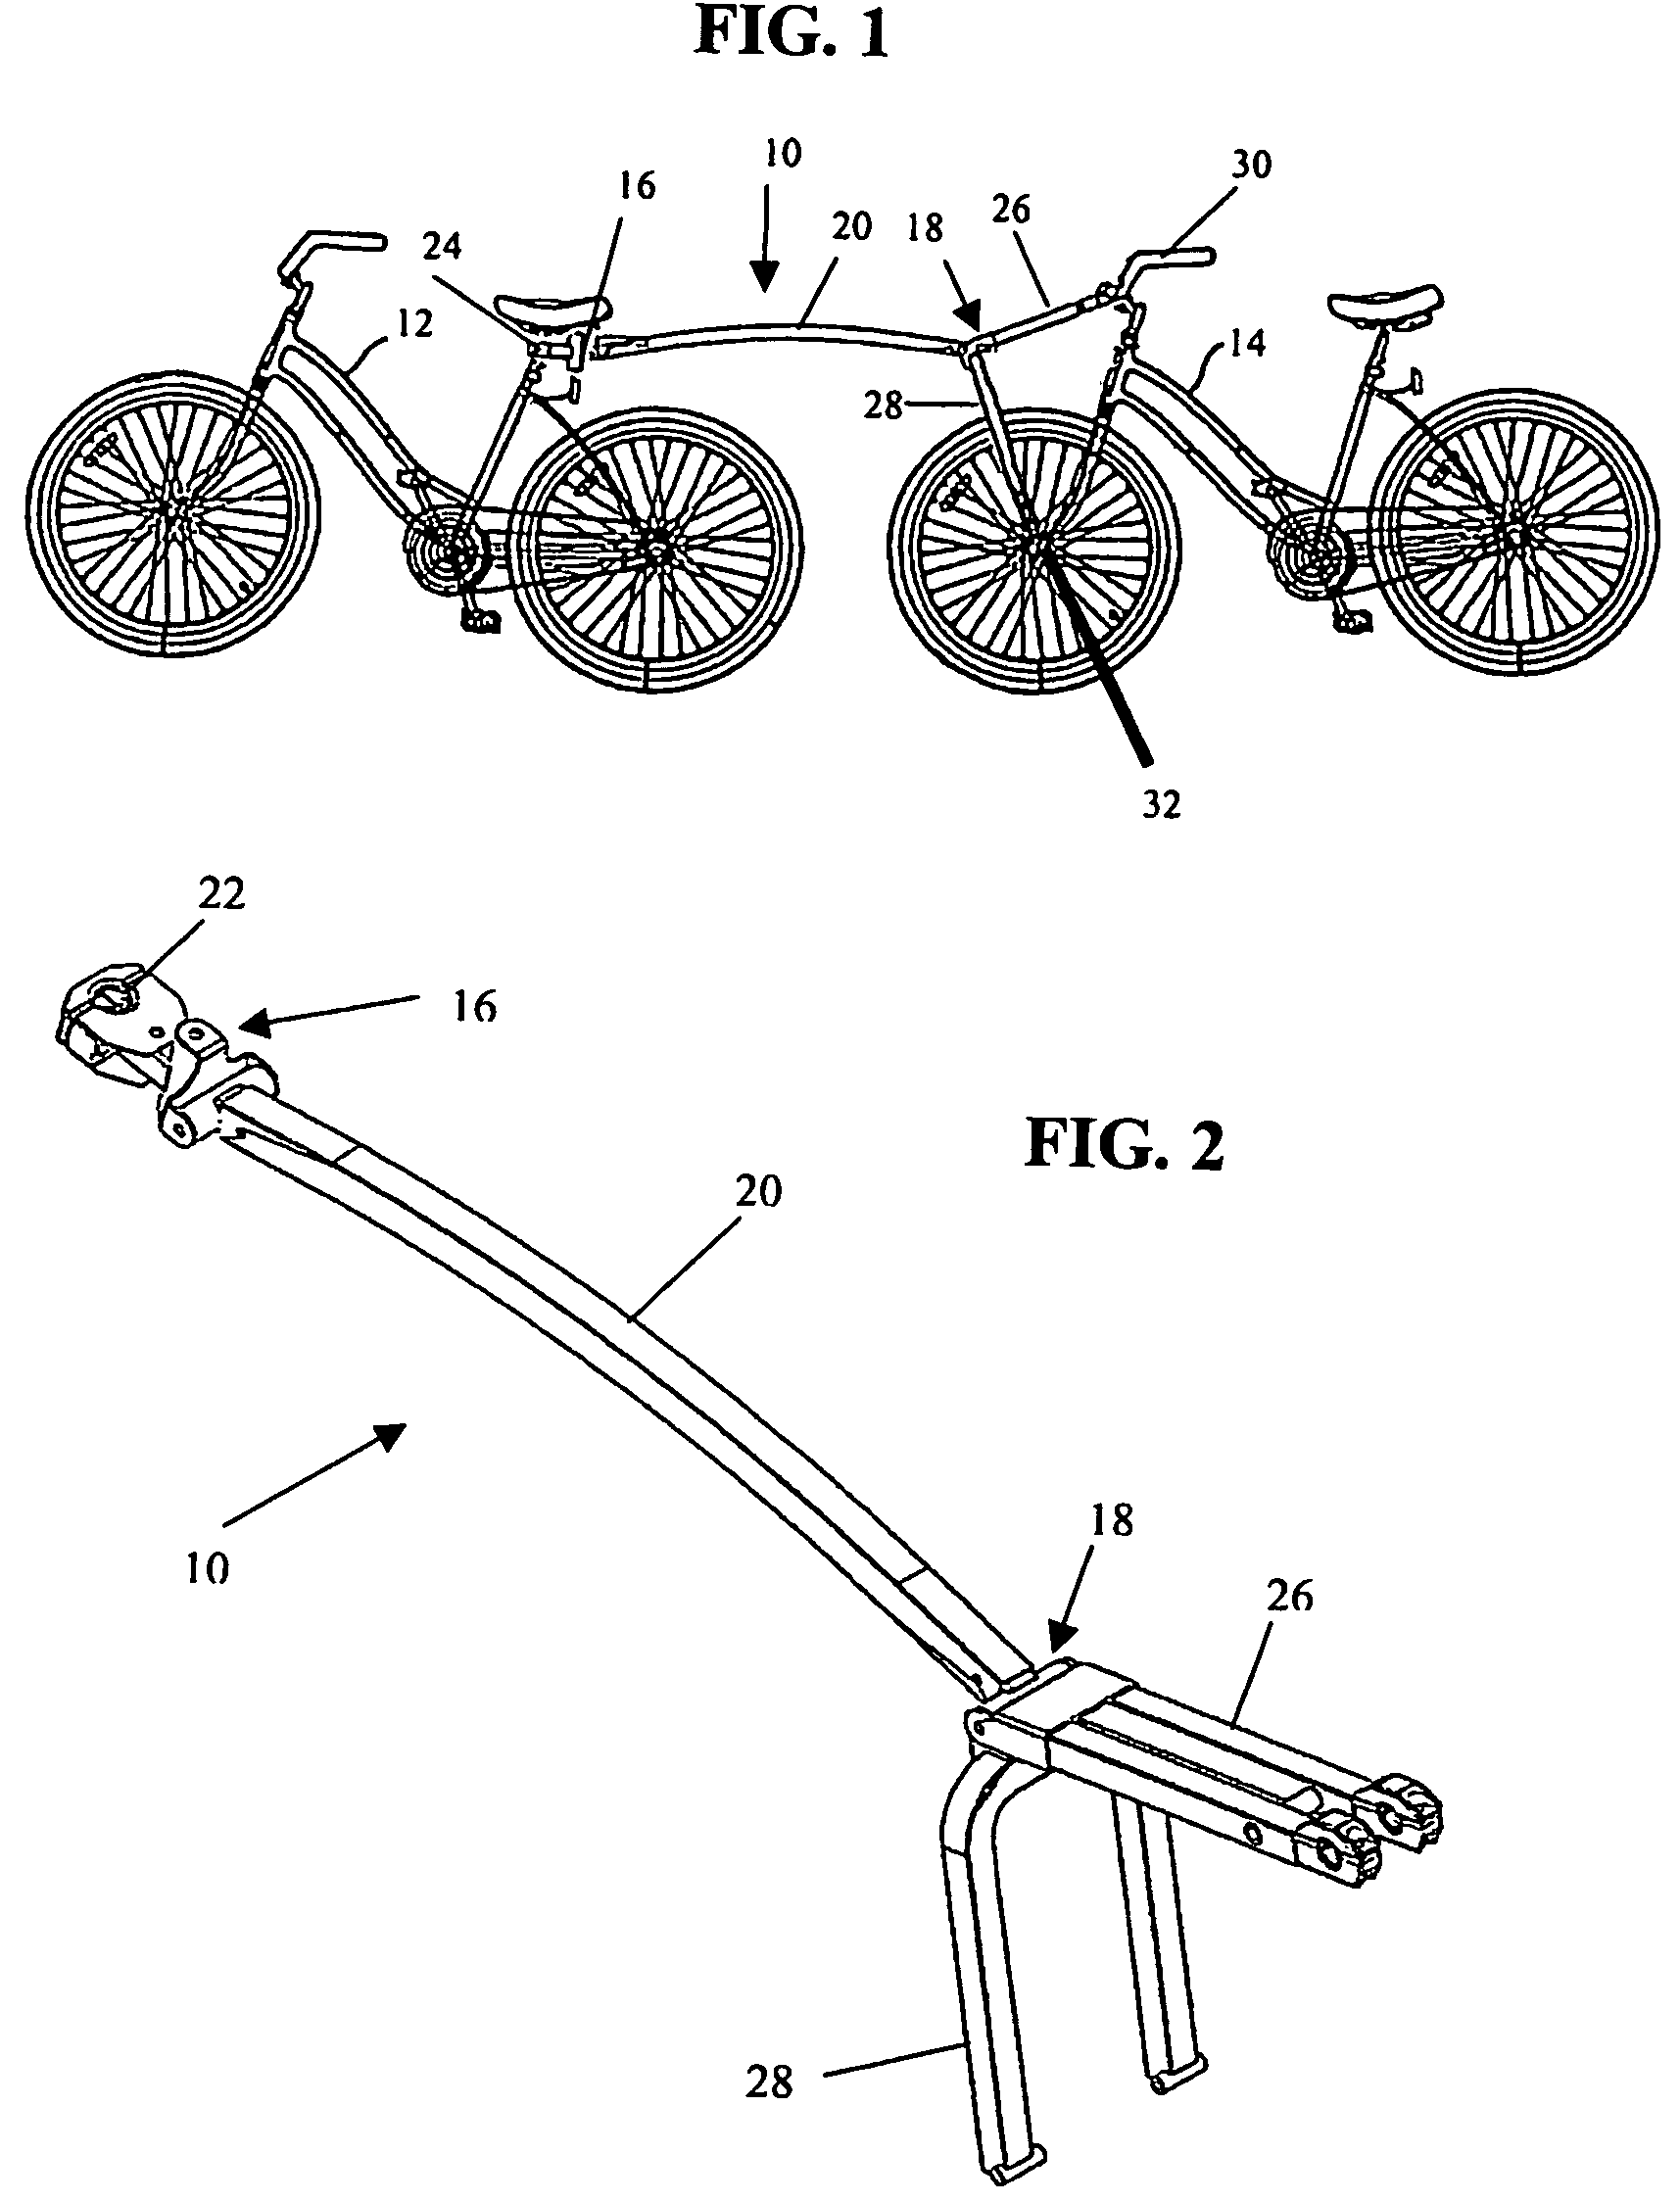 Bicycle towing device